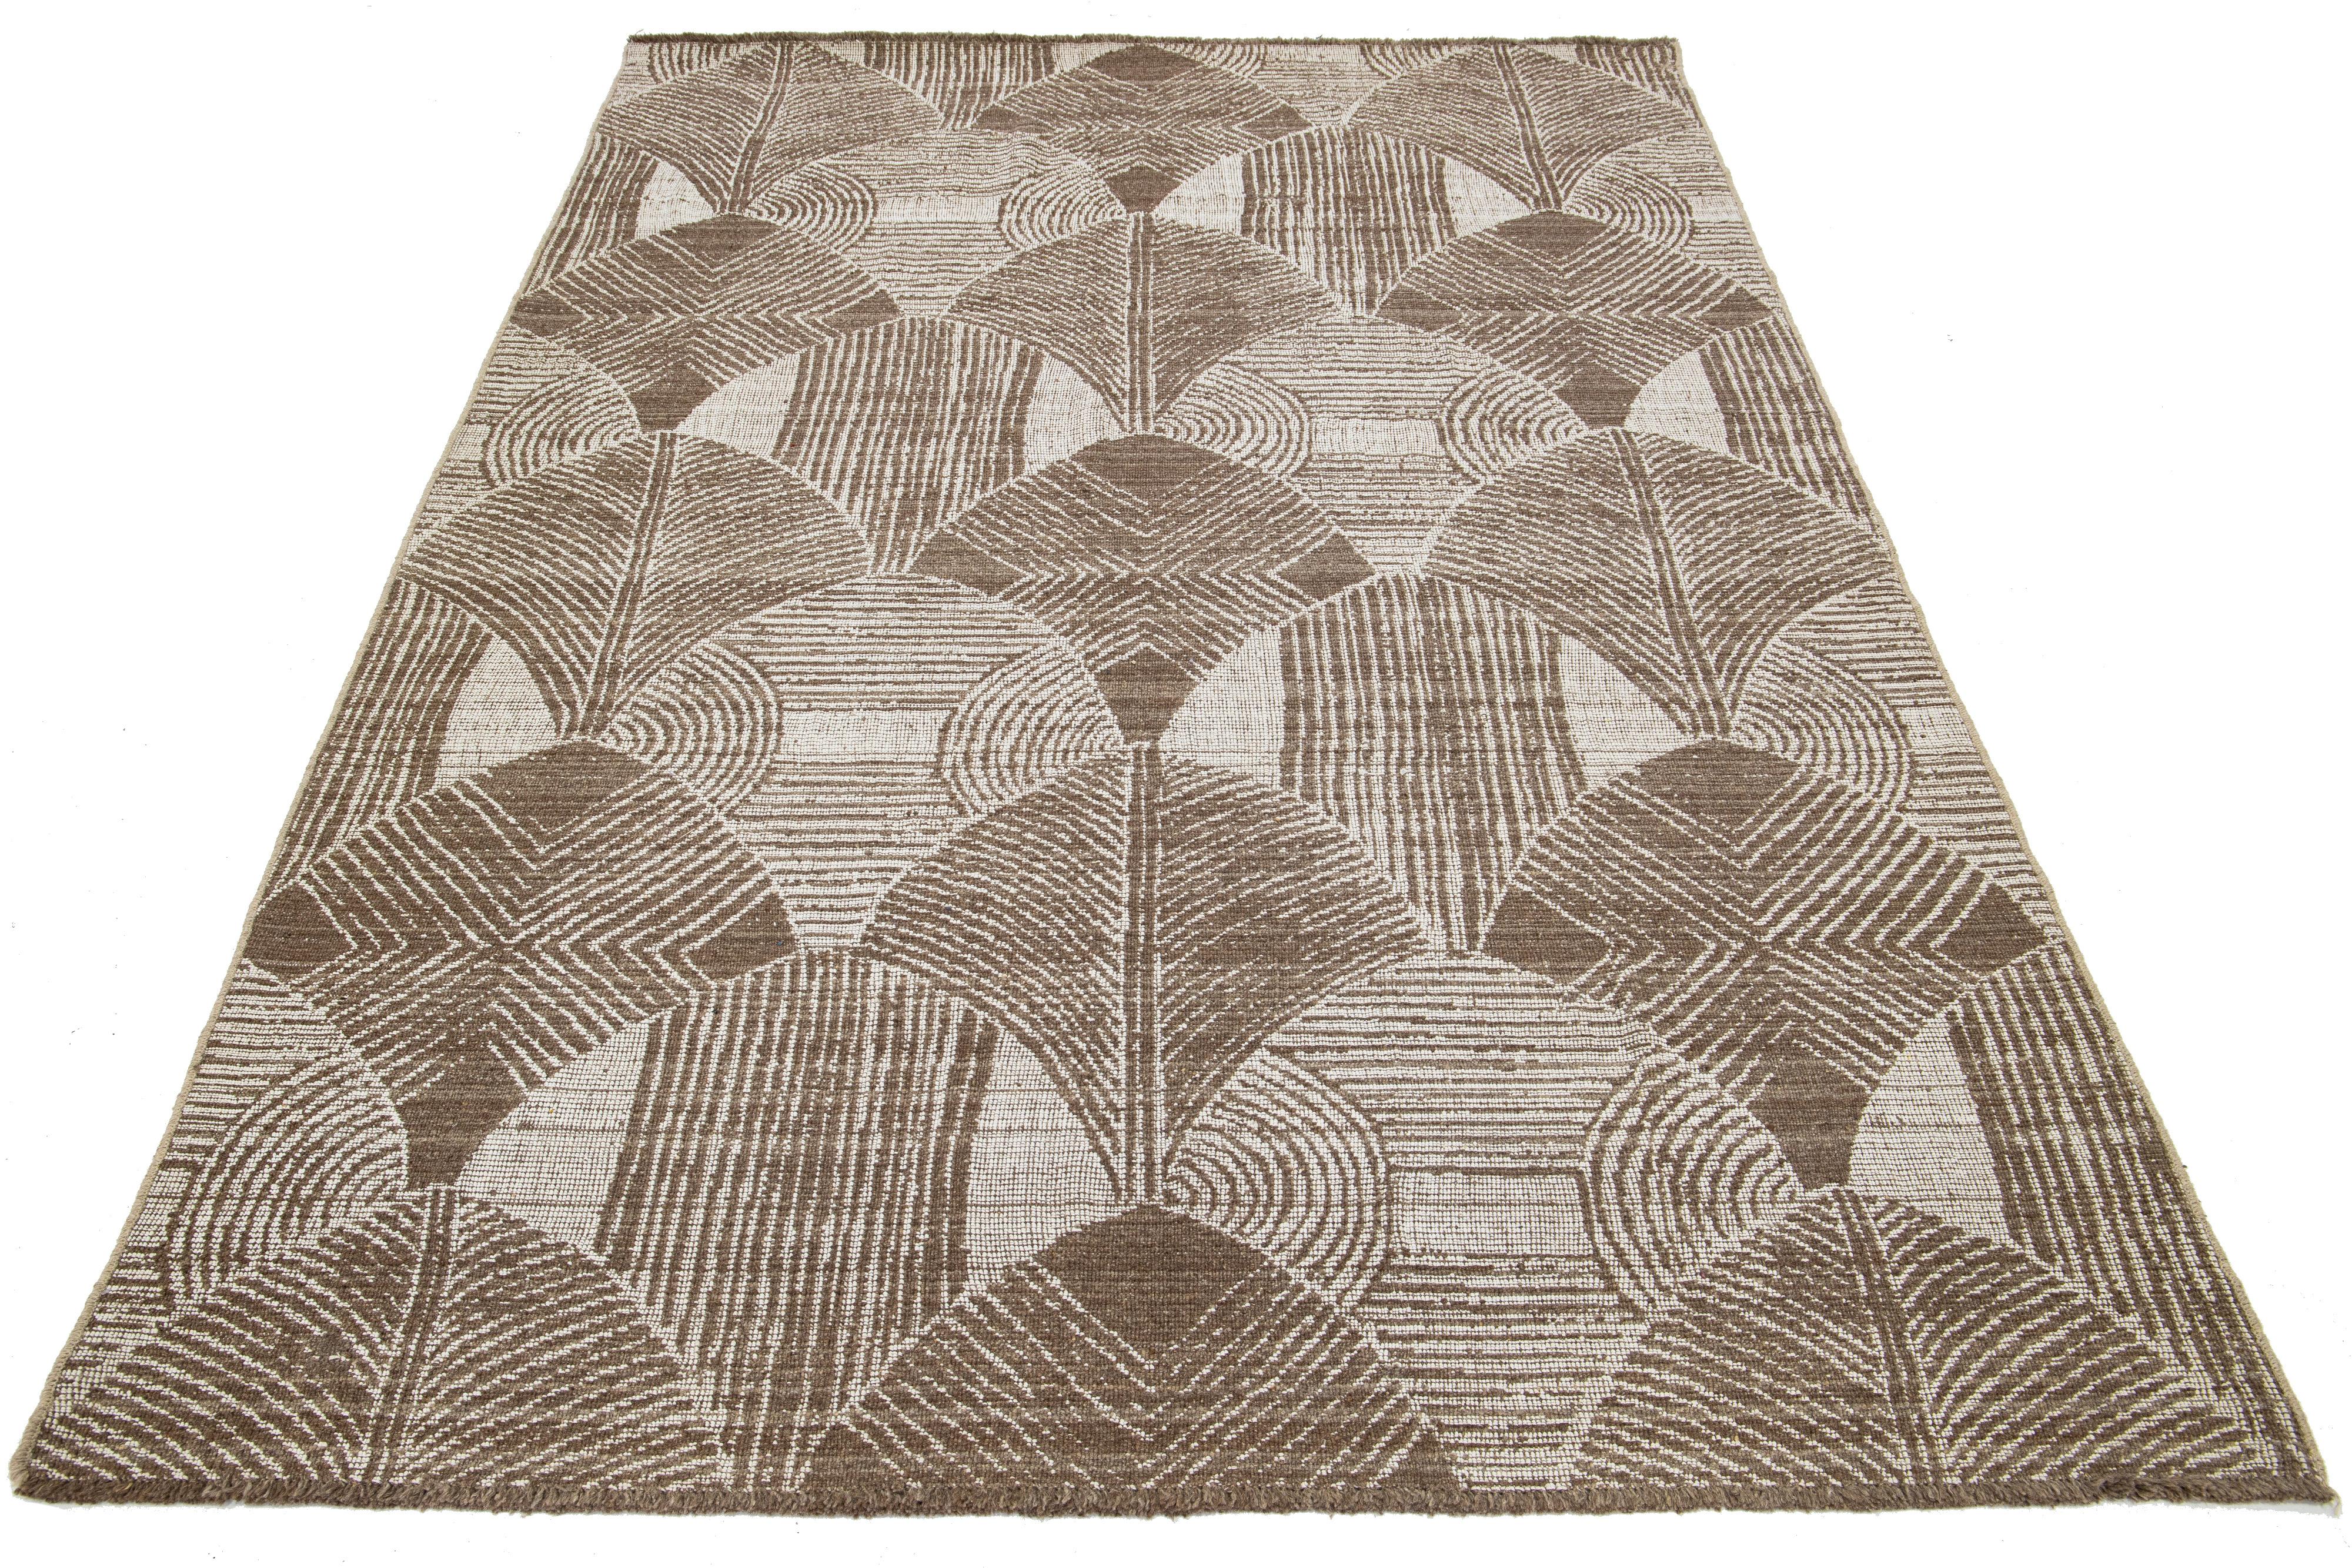 This Modern hand-loom wool rug showcases a stunning beige-taupe field with an all-over abstract design.

This rug measures 6'4